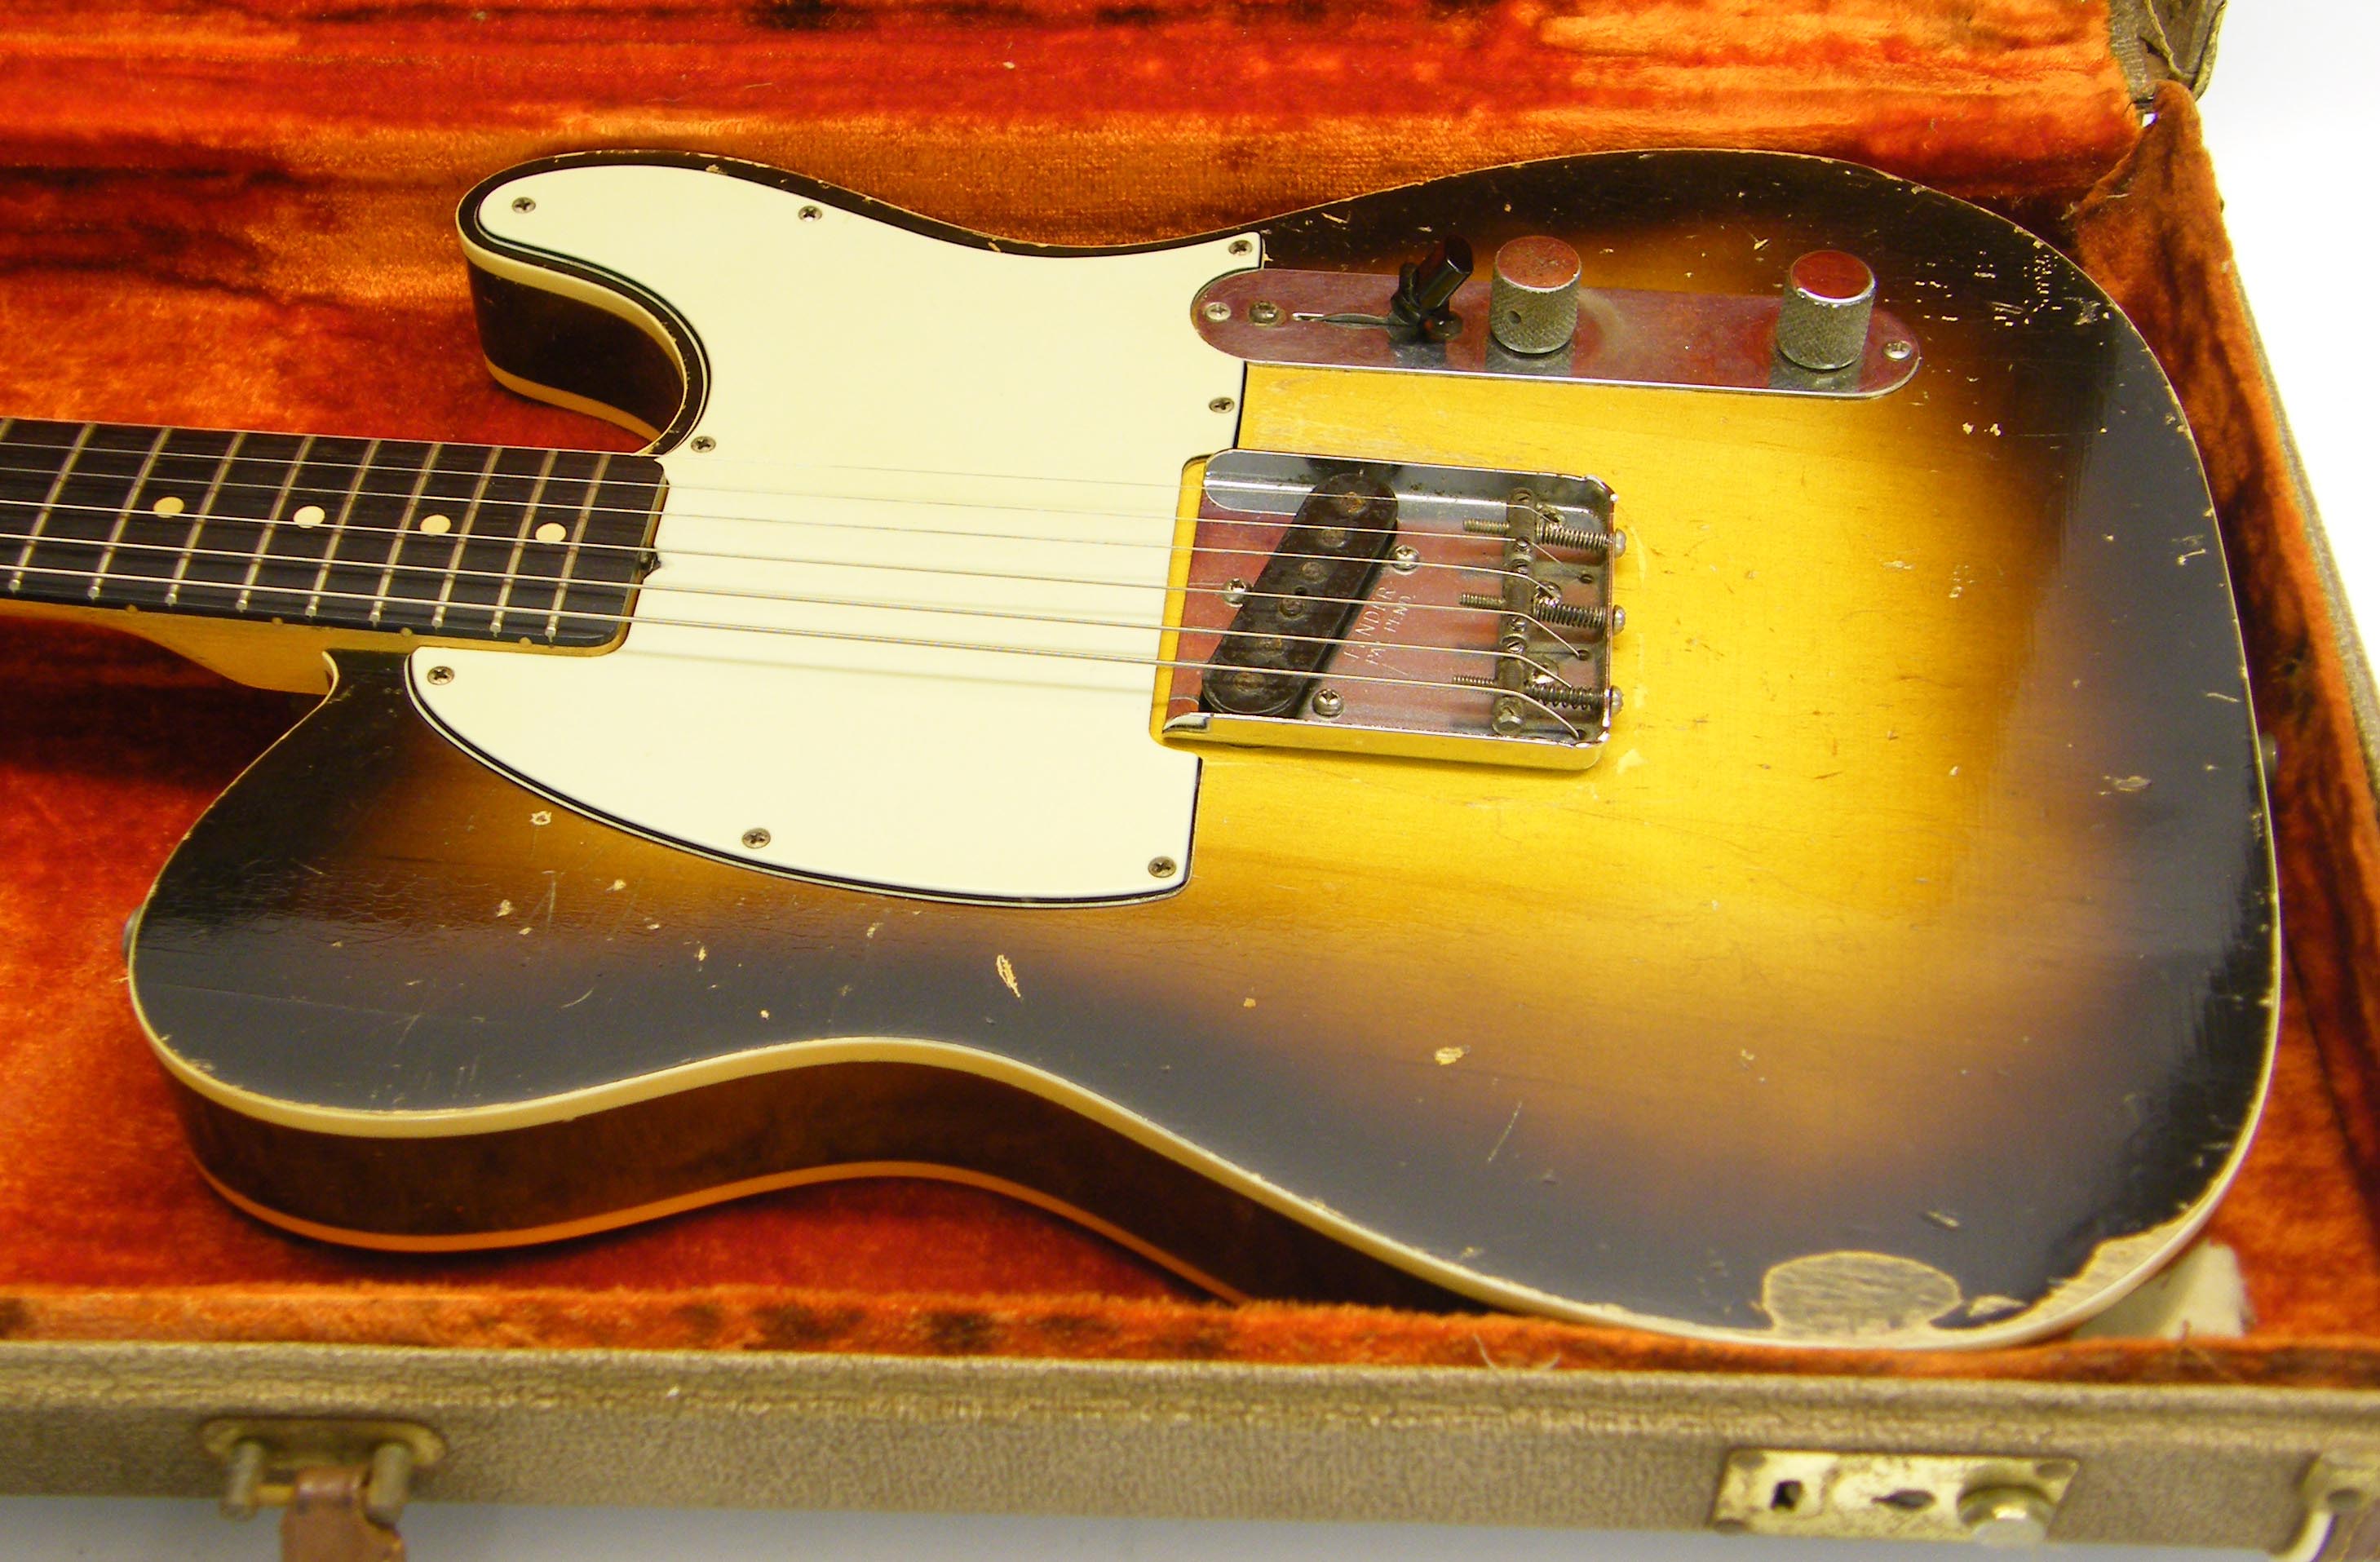 1960 Fender Custom Esquire electric guitar, made in USA, ser. no. 54146, sunburst finish with - Image 3 of 8